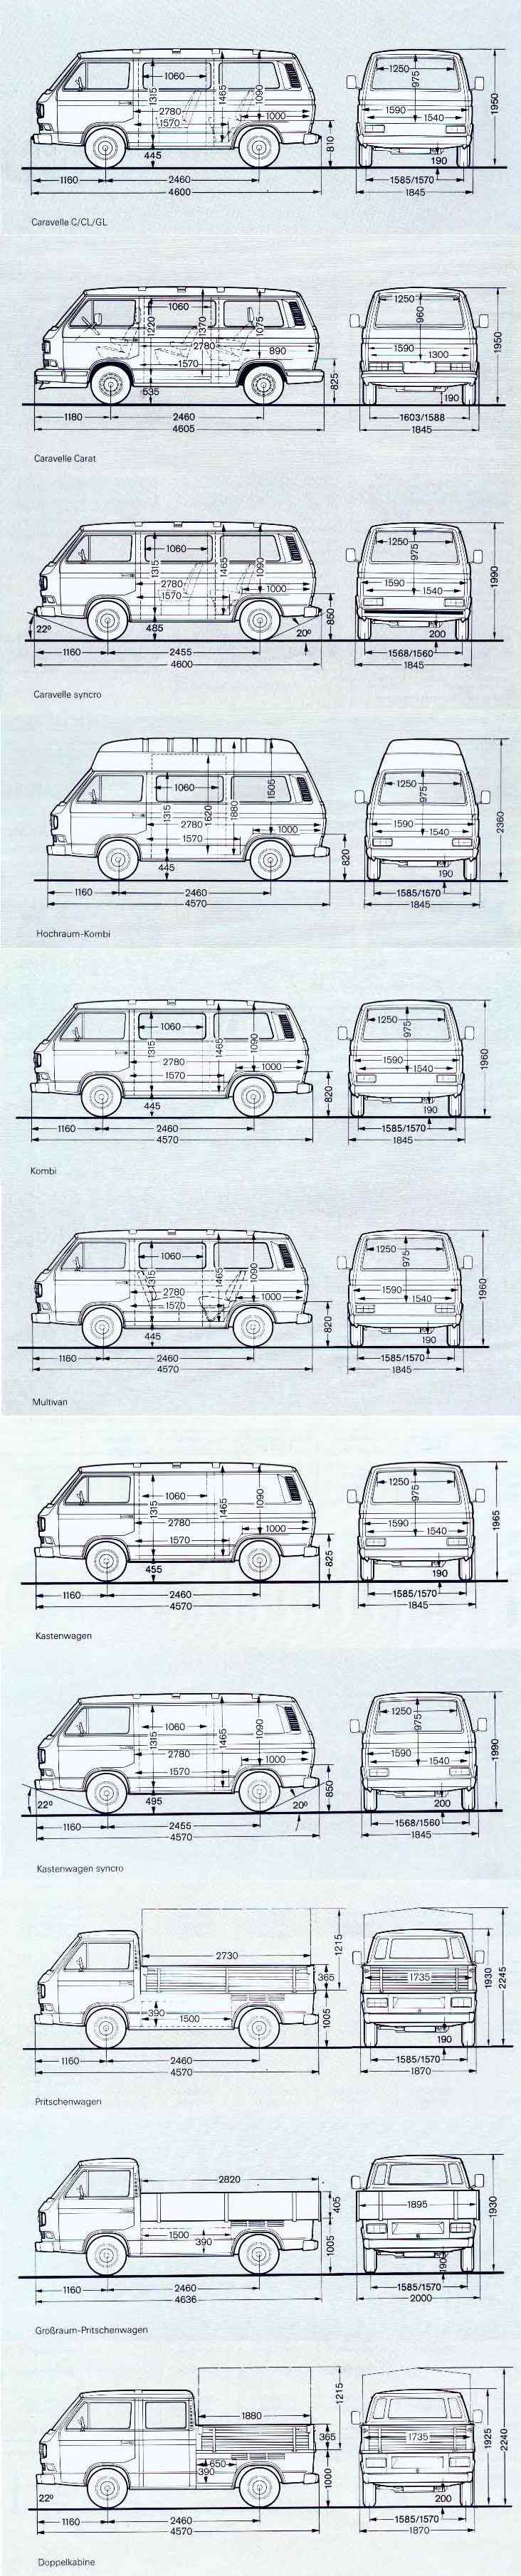 T25 all vehicle dimensions.jpg